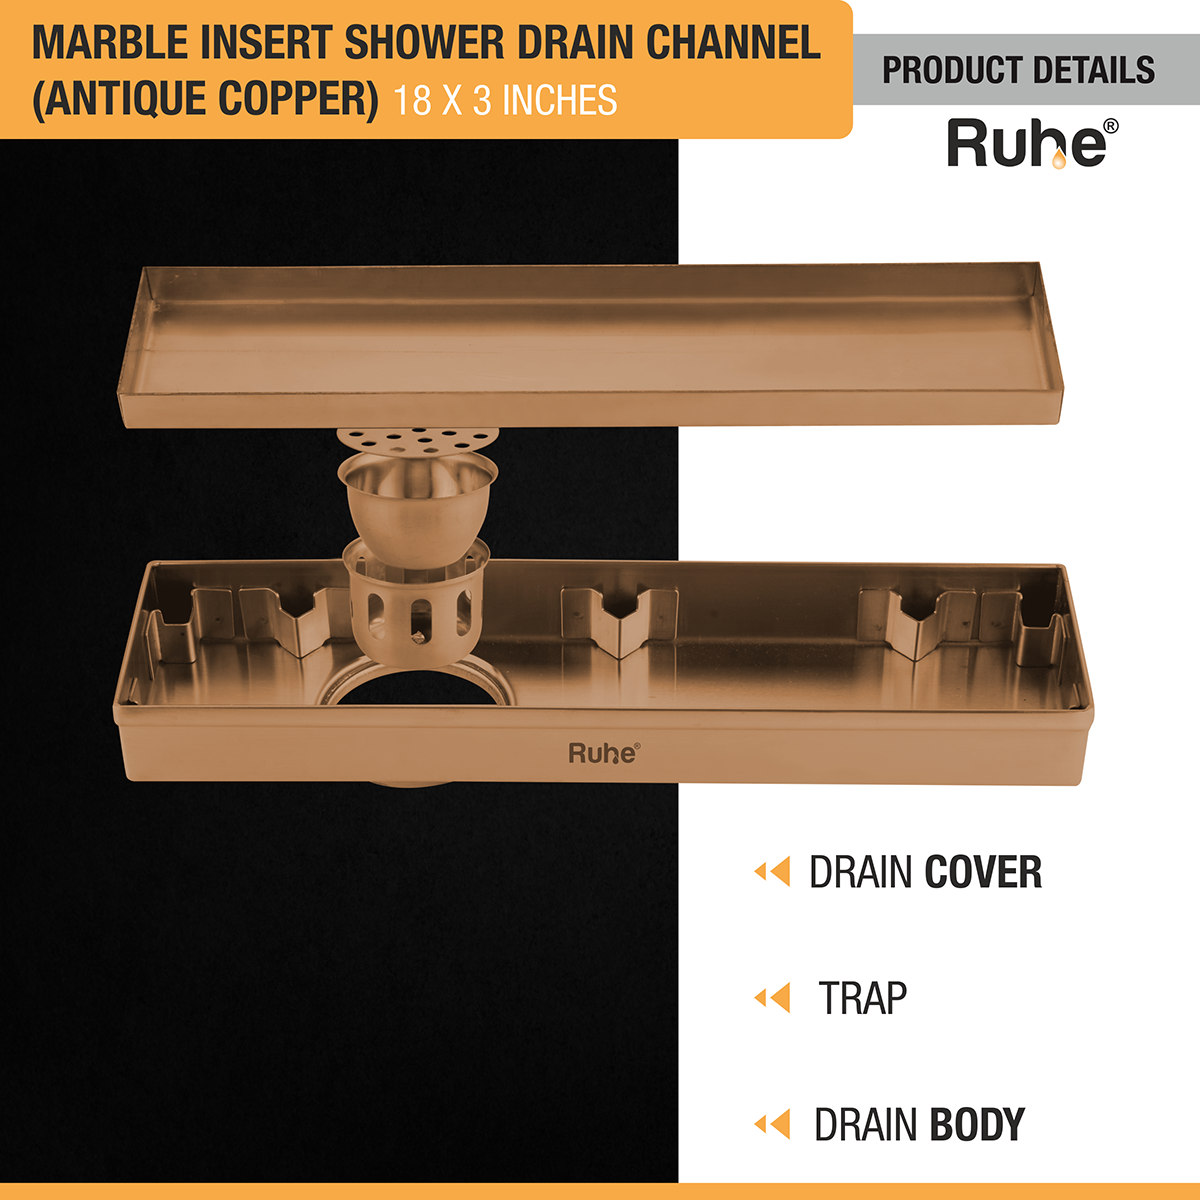 Marble Insert Shower Drain Channel (18 x 3 Inches) ROSE GOLD PVD Coated with drain cover, trap, and drain body